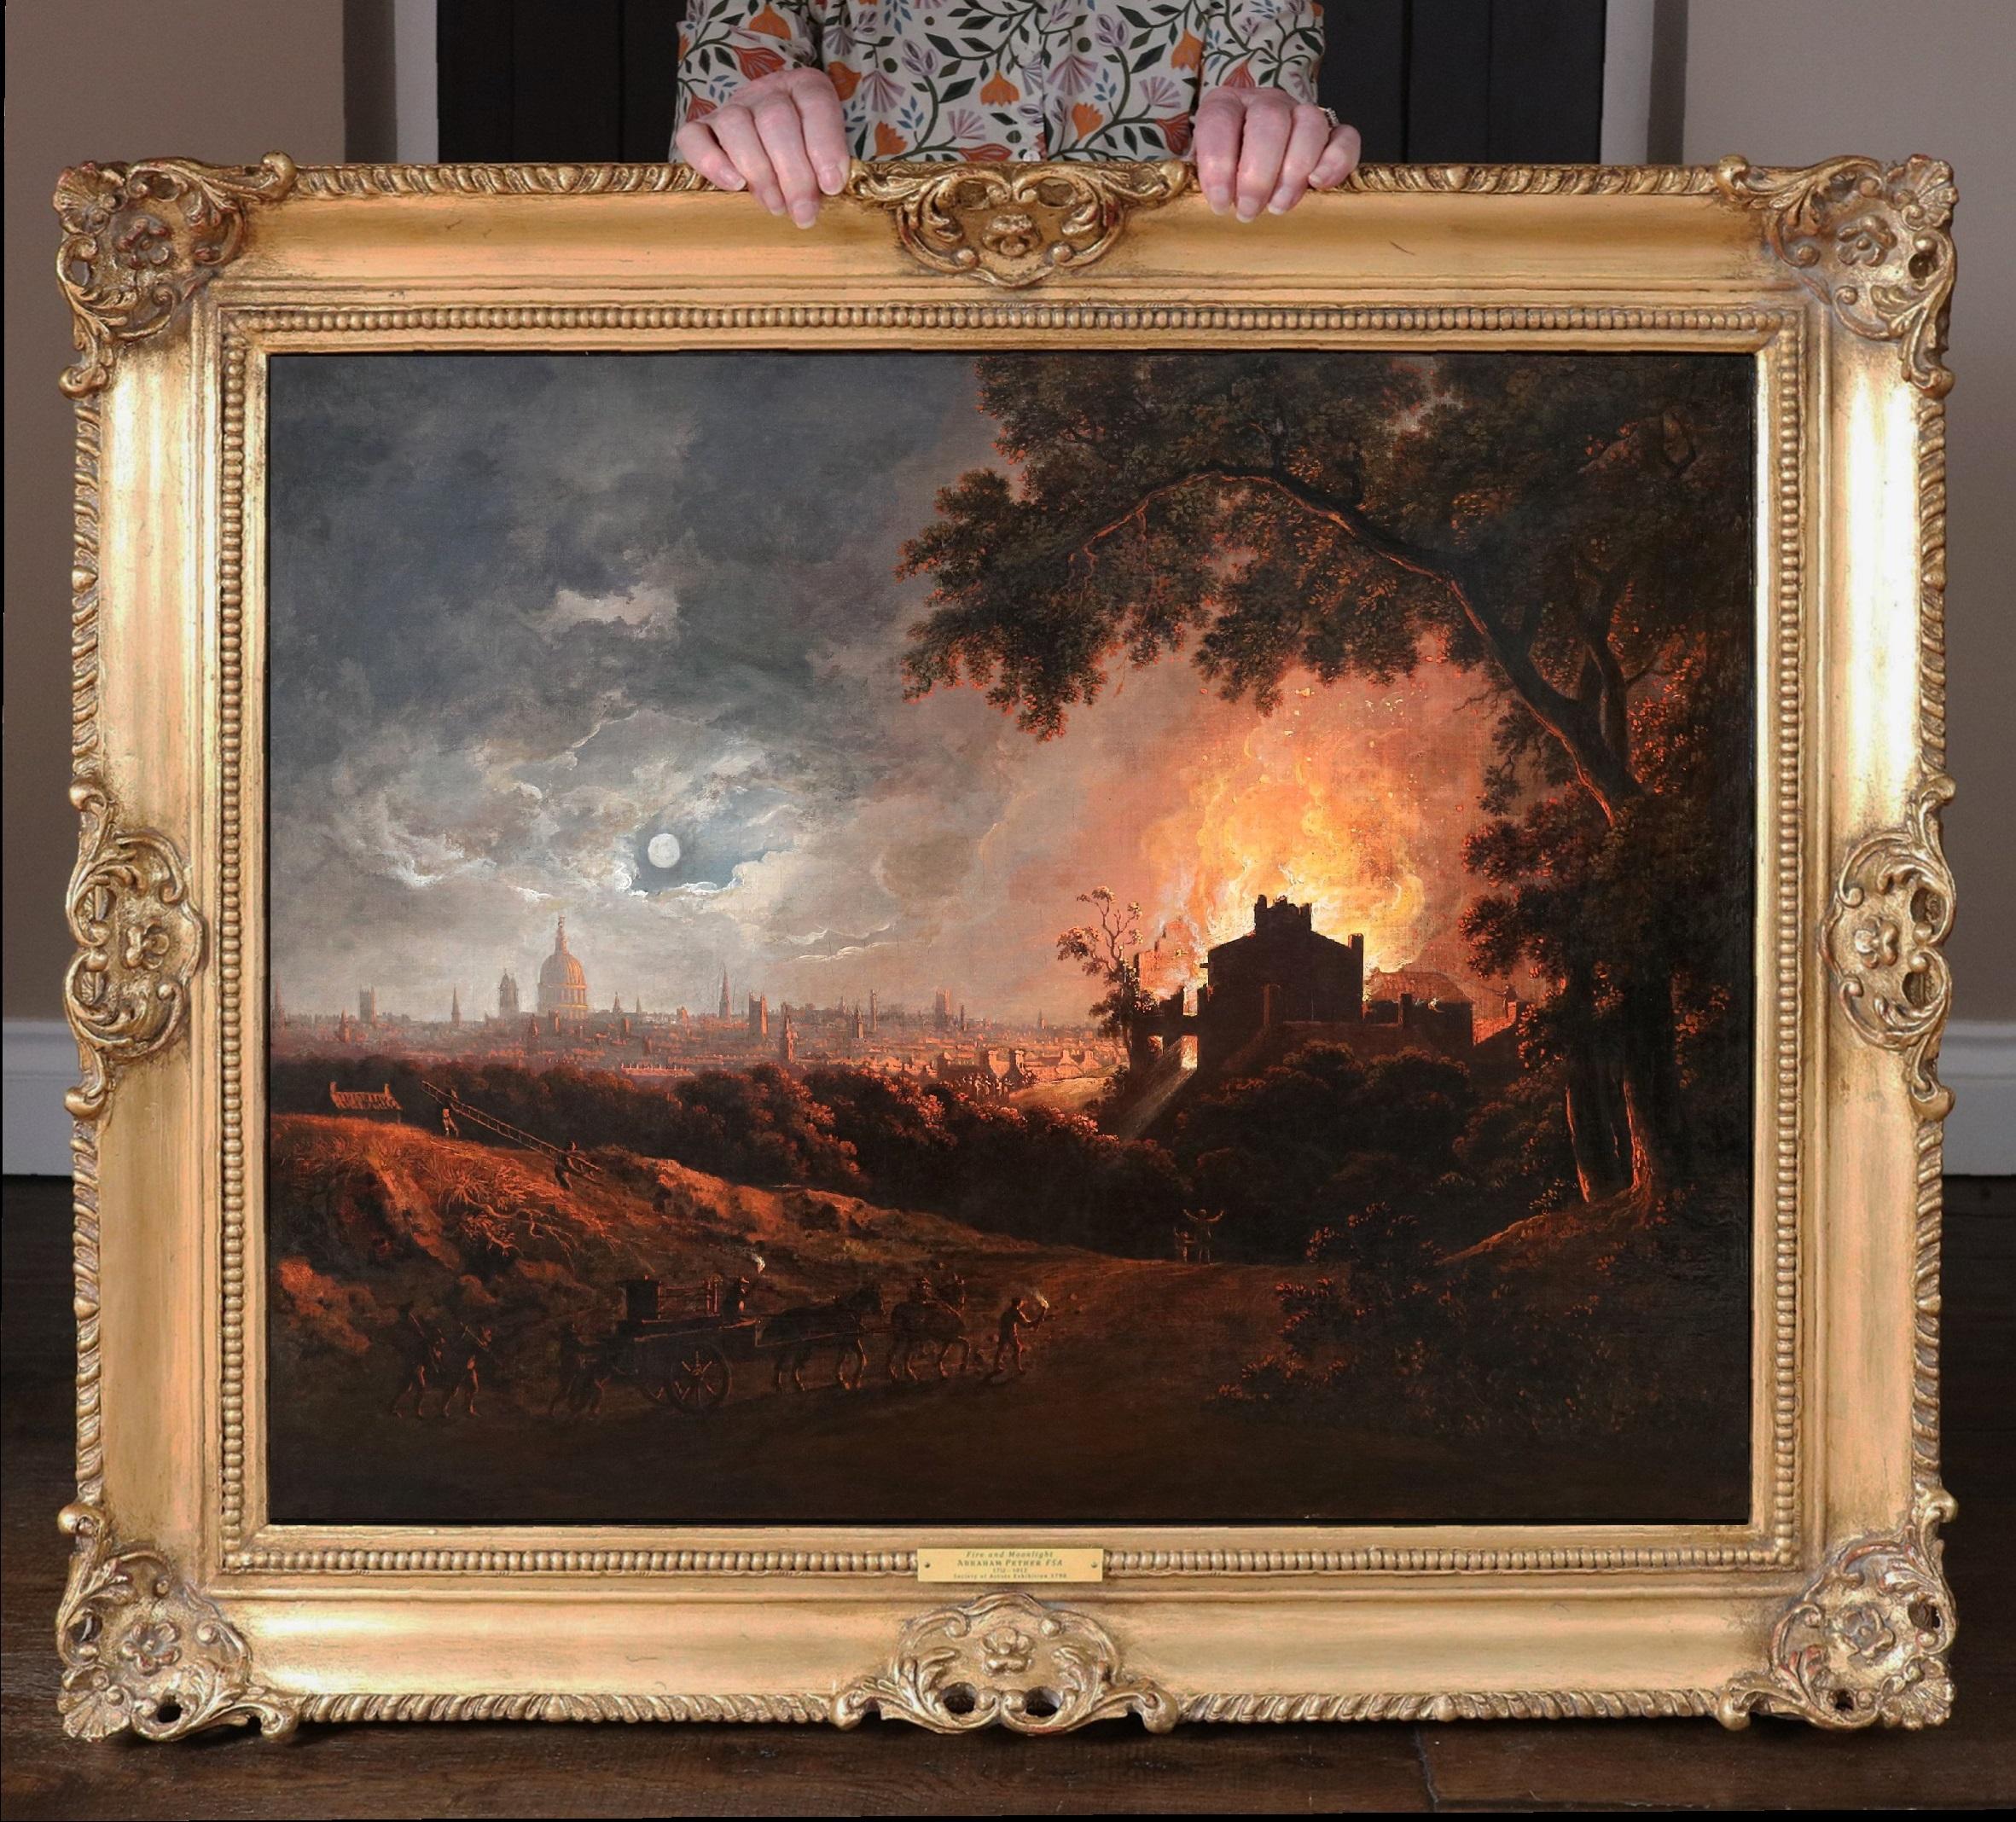 Abraham Pether Landscape Painting - Fire & Moonlight - Important 18th Century Old Master Oil Painting London Night